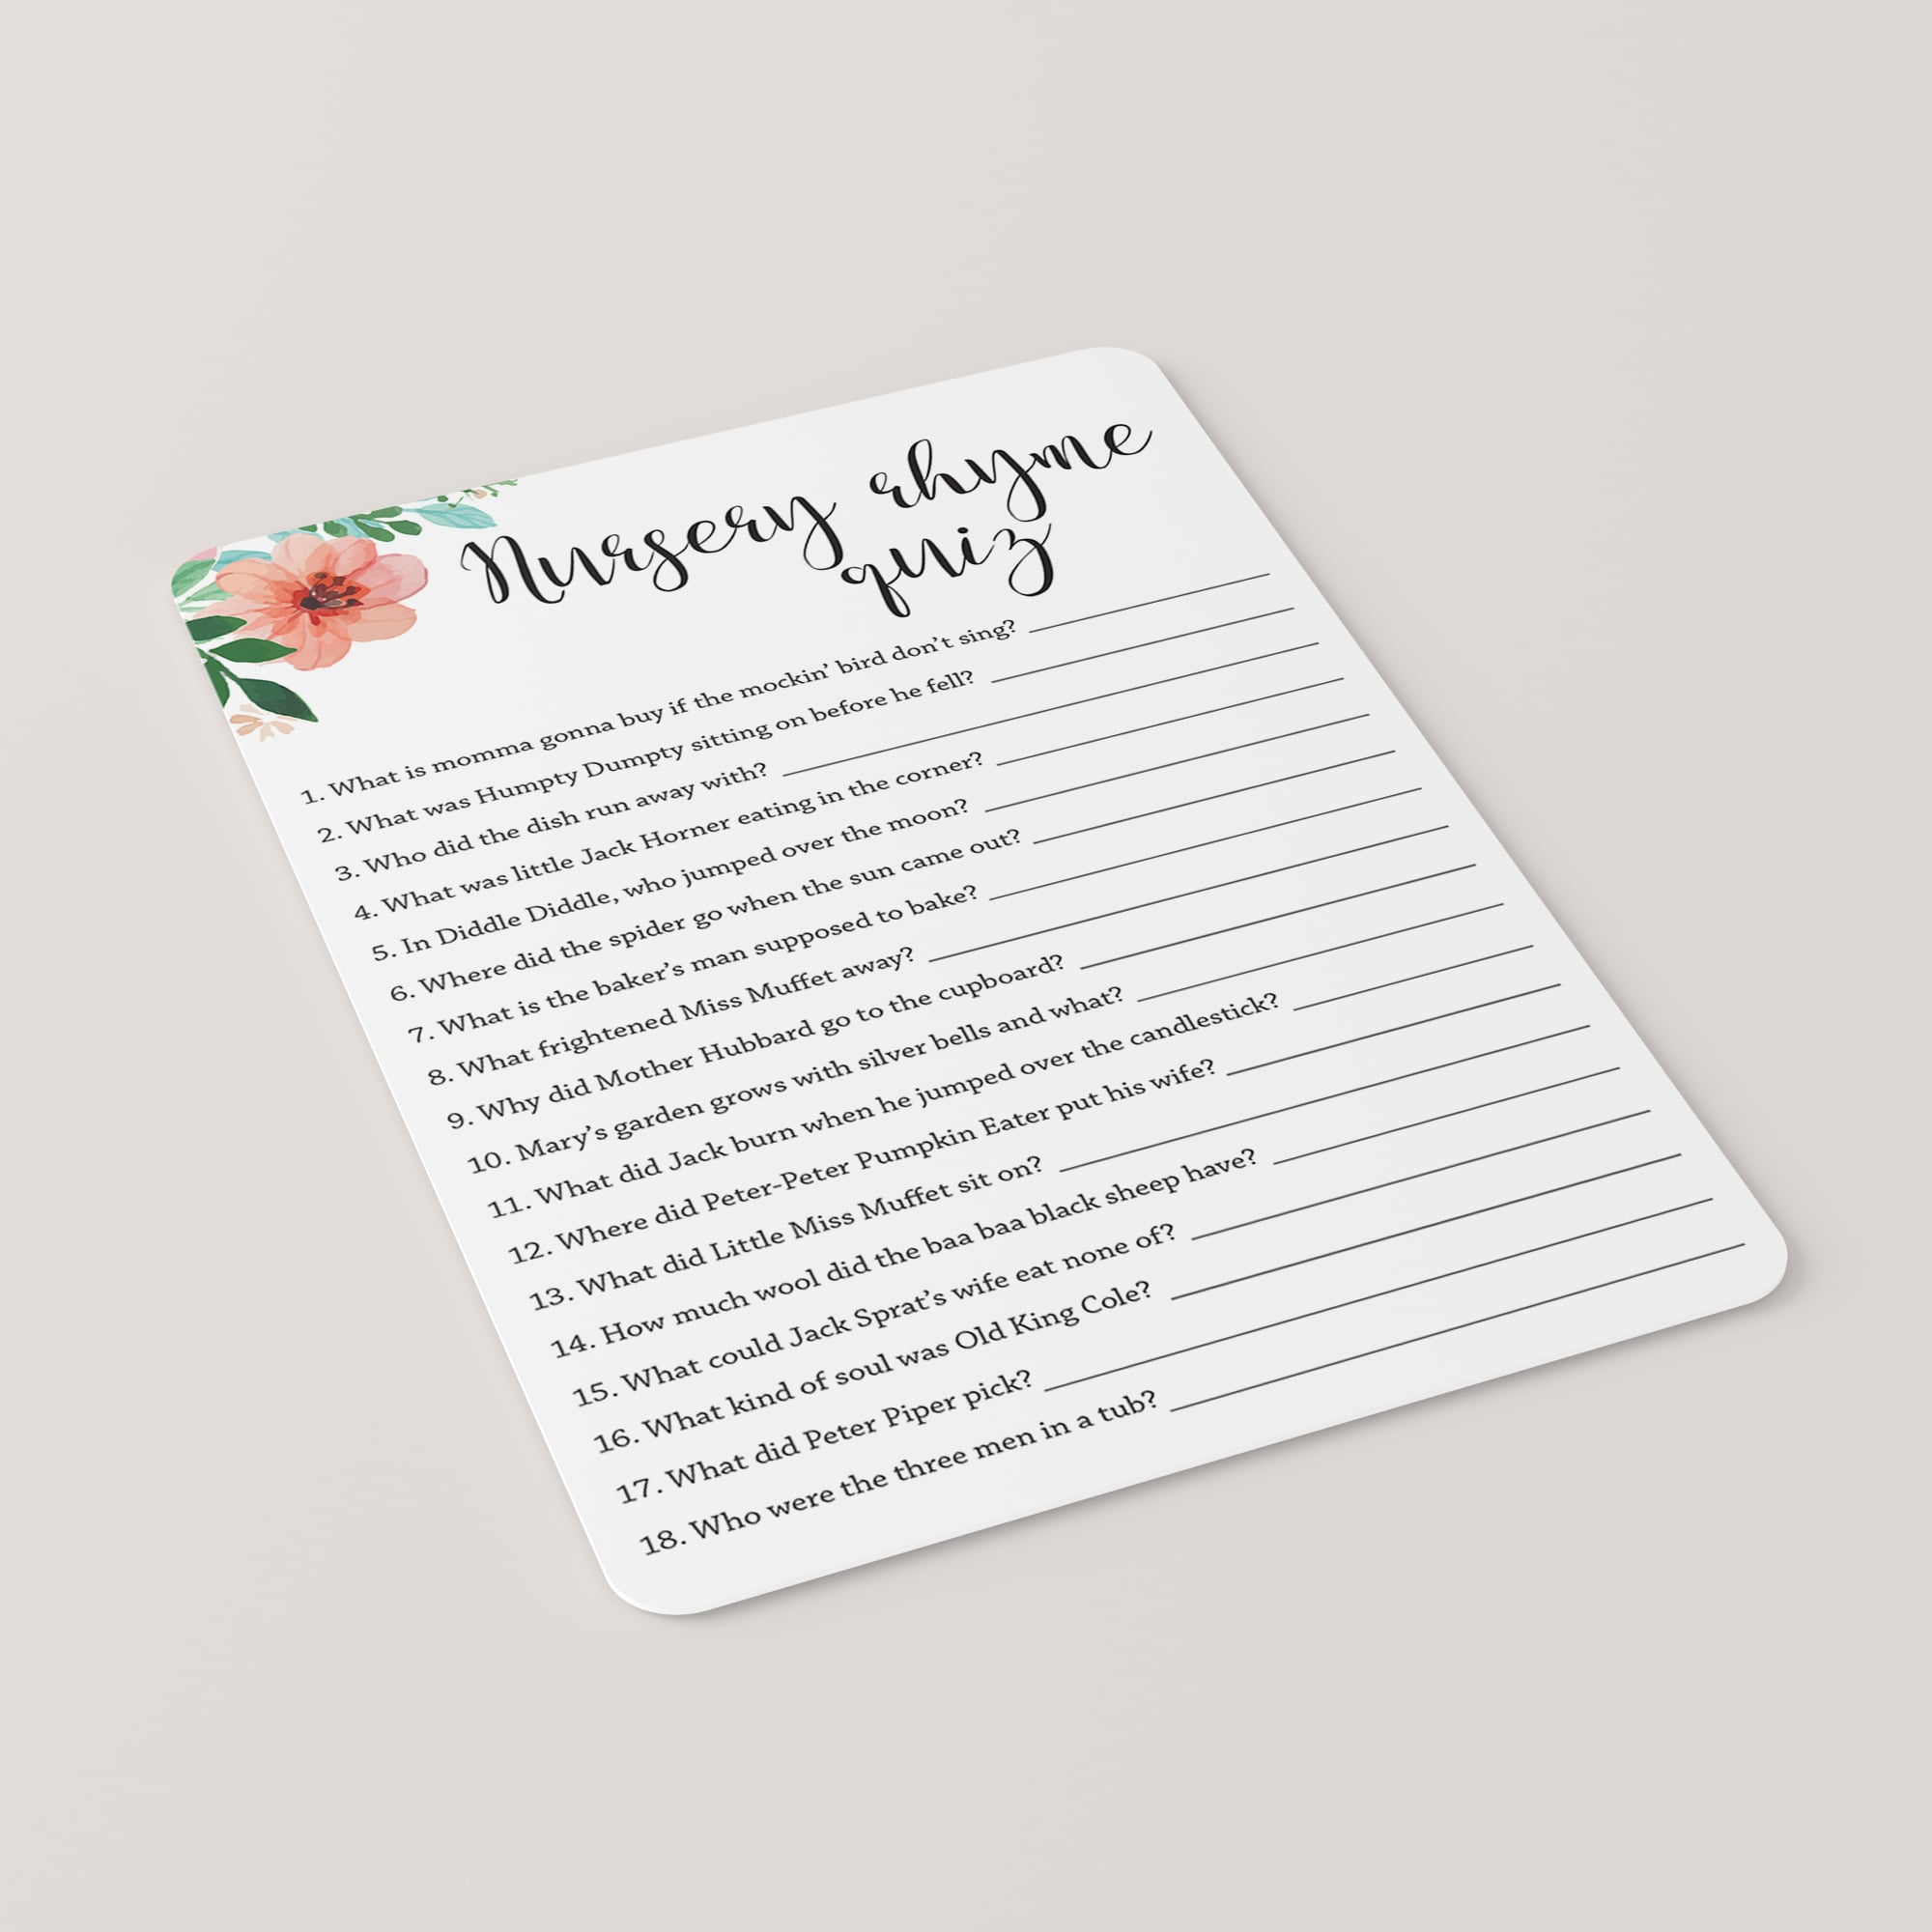 Game Baby shower Nursery rhyme Quiz Party, party, game, flower Arranging,  holidays png